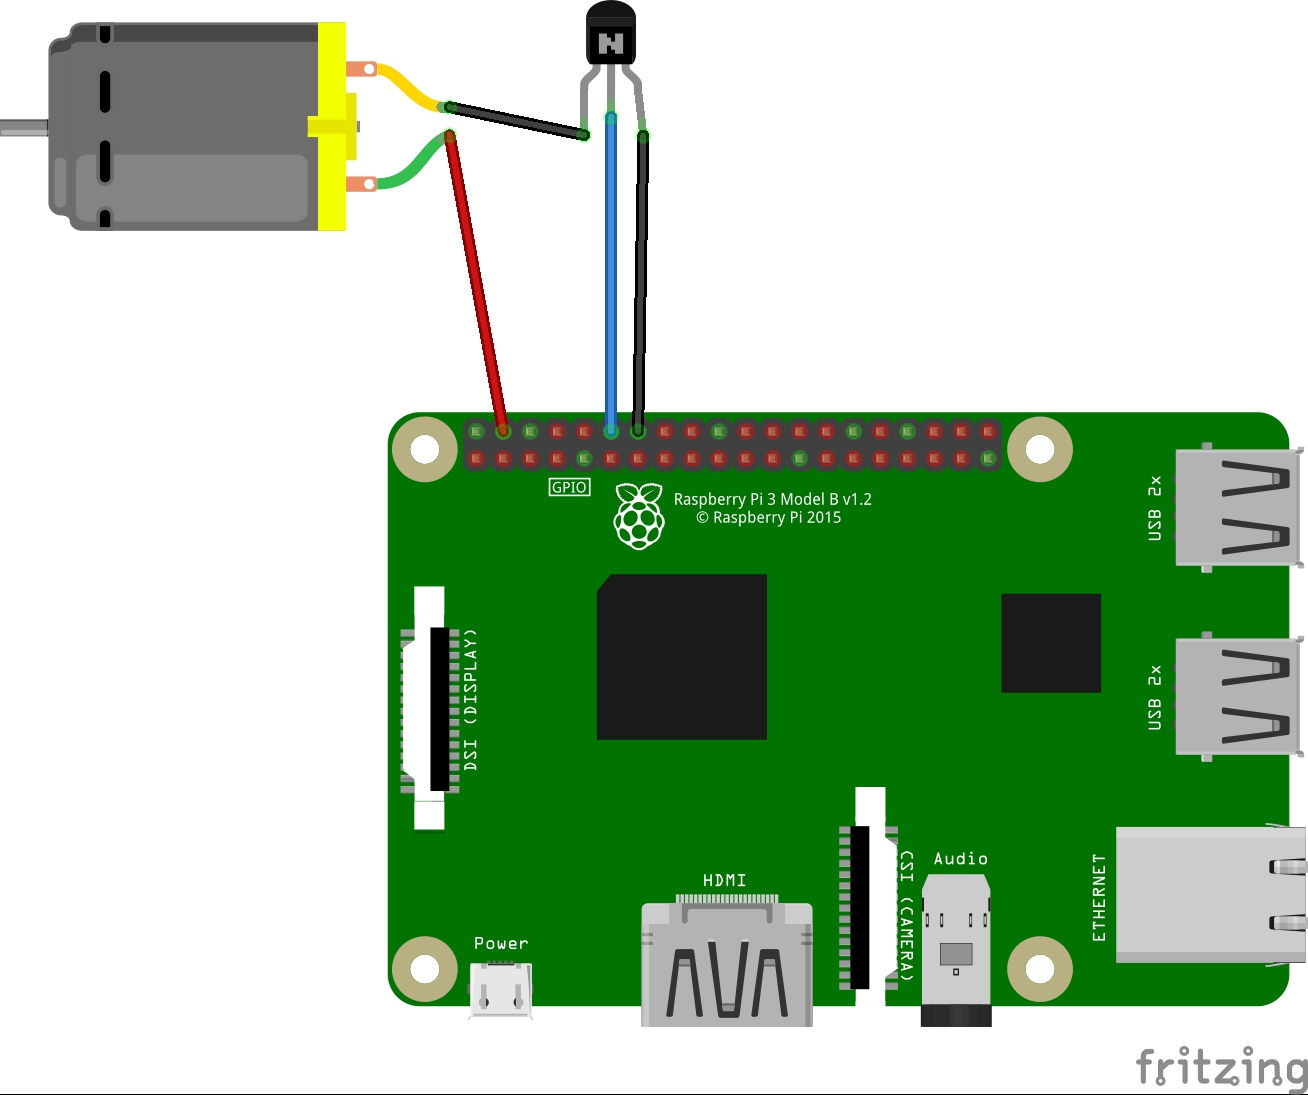 How to Control a DC Fan Using the Raspberry Pi